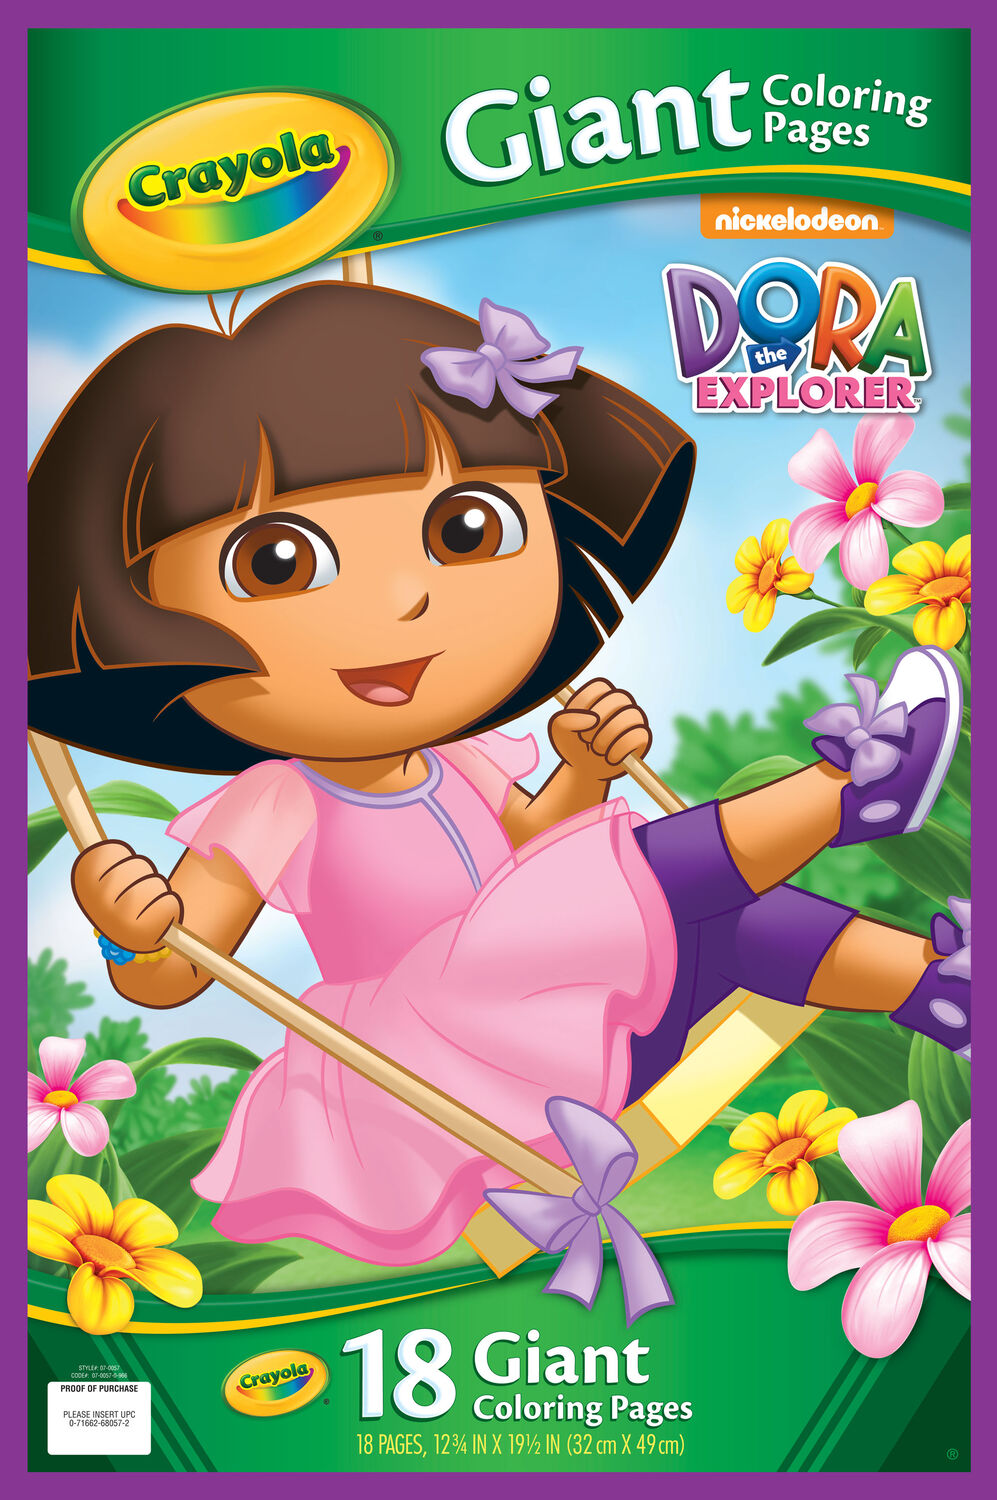 Download Giant Coloring Pages - Dora the Explorer | Crayola